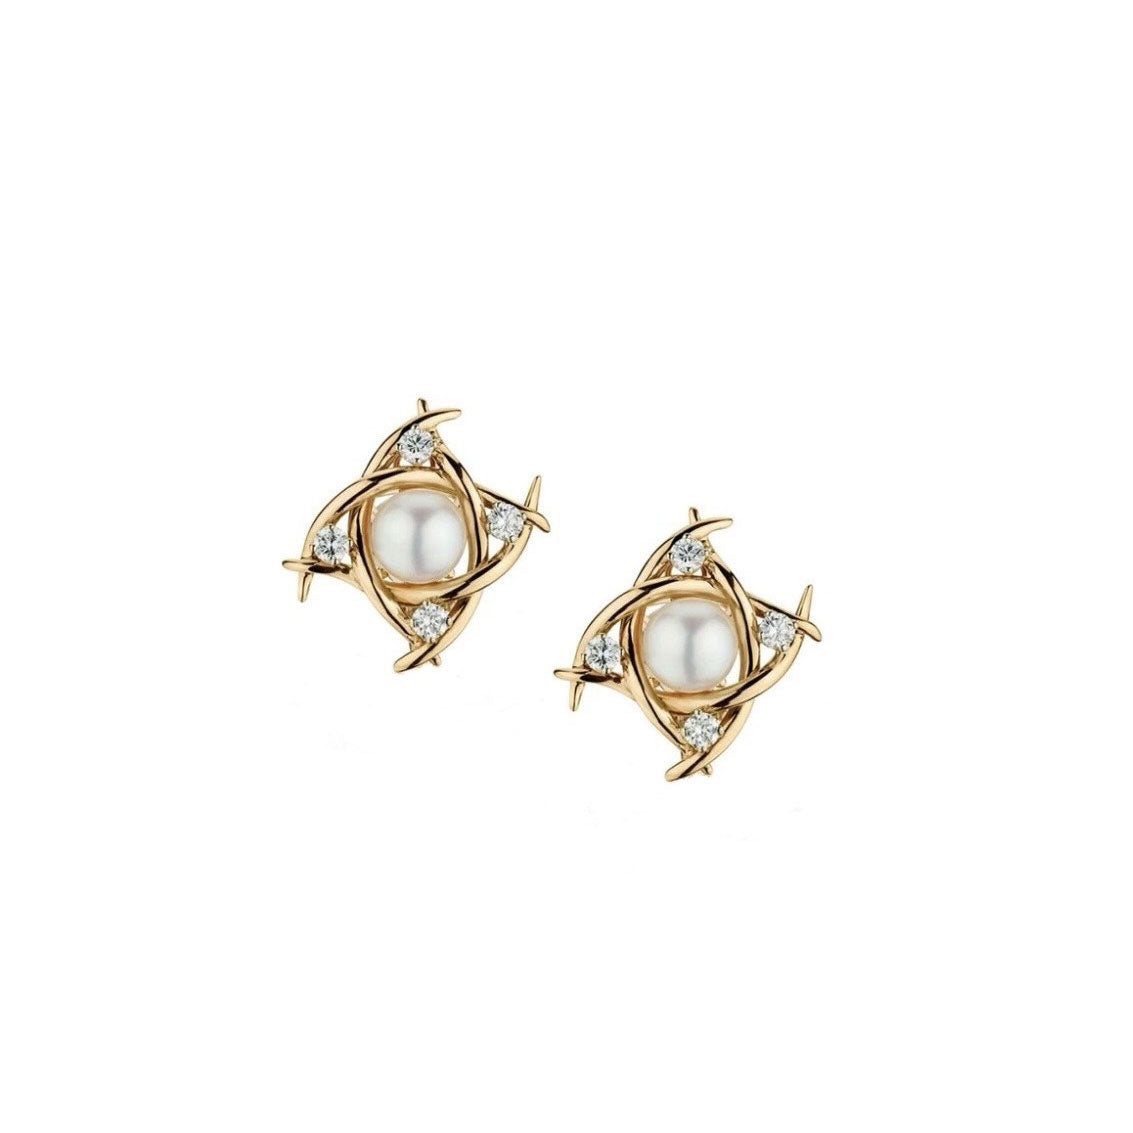 Tiffany & Co Schlumberger Pearl and Diamond earrings